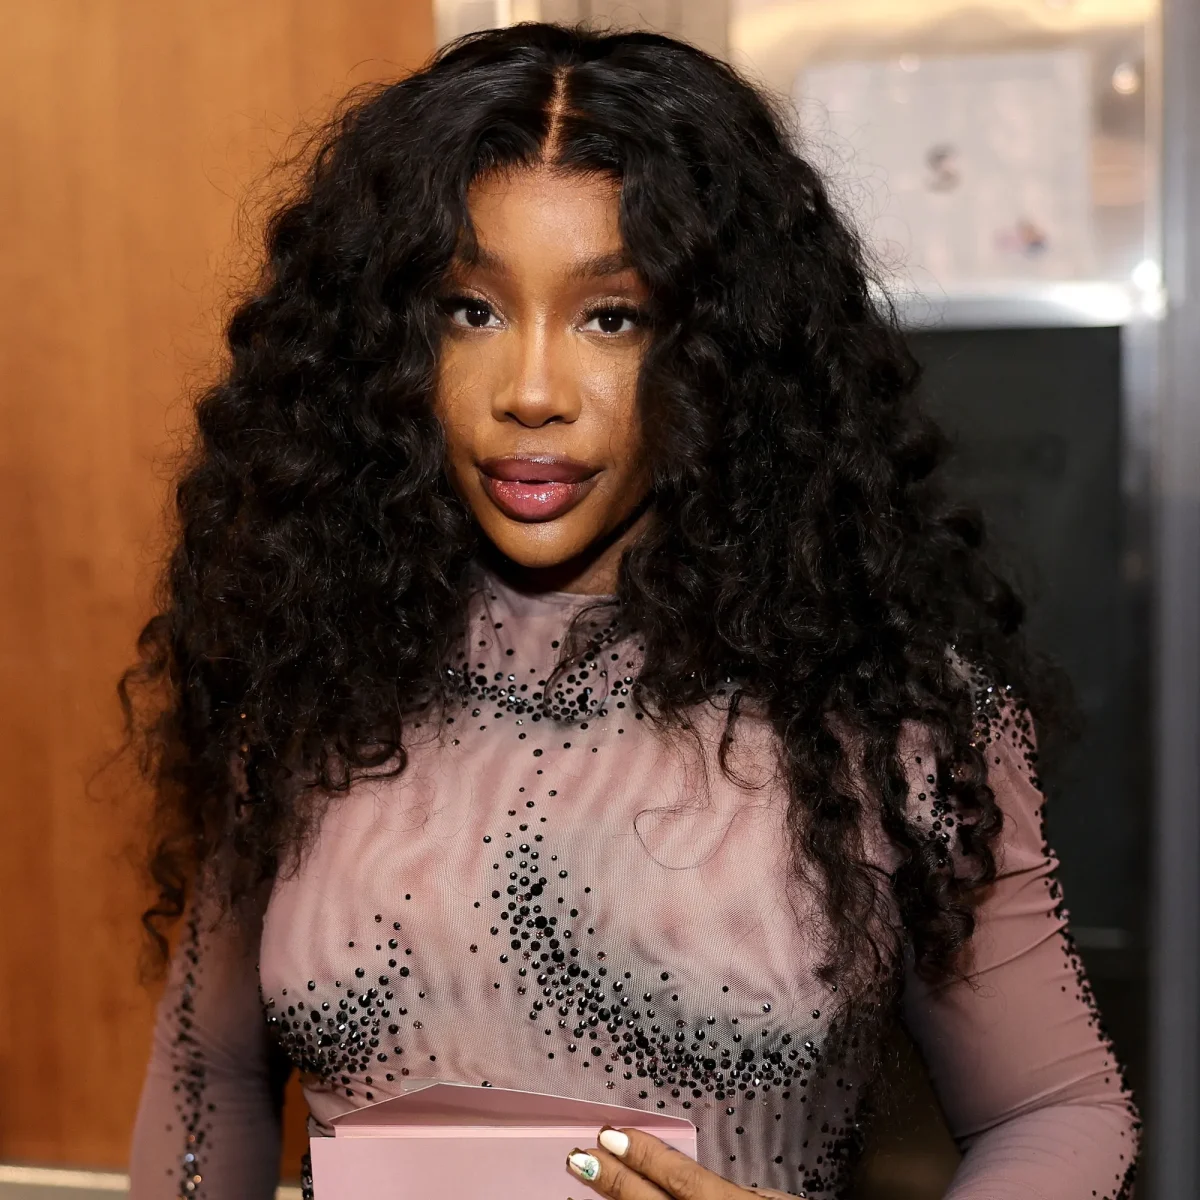 Sza Reacts To Fans' Unruly Behavior At Her Aussie Concert 5